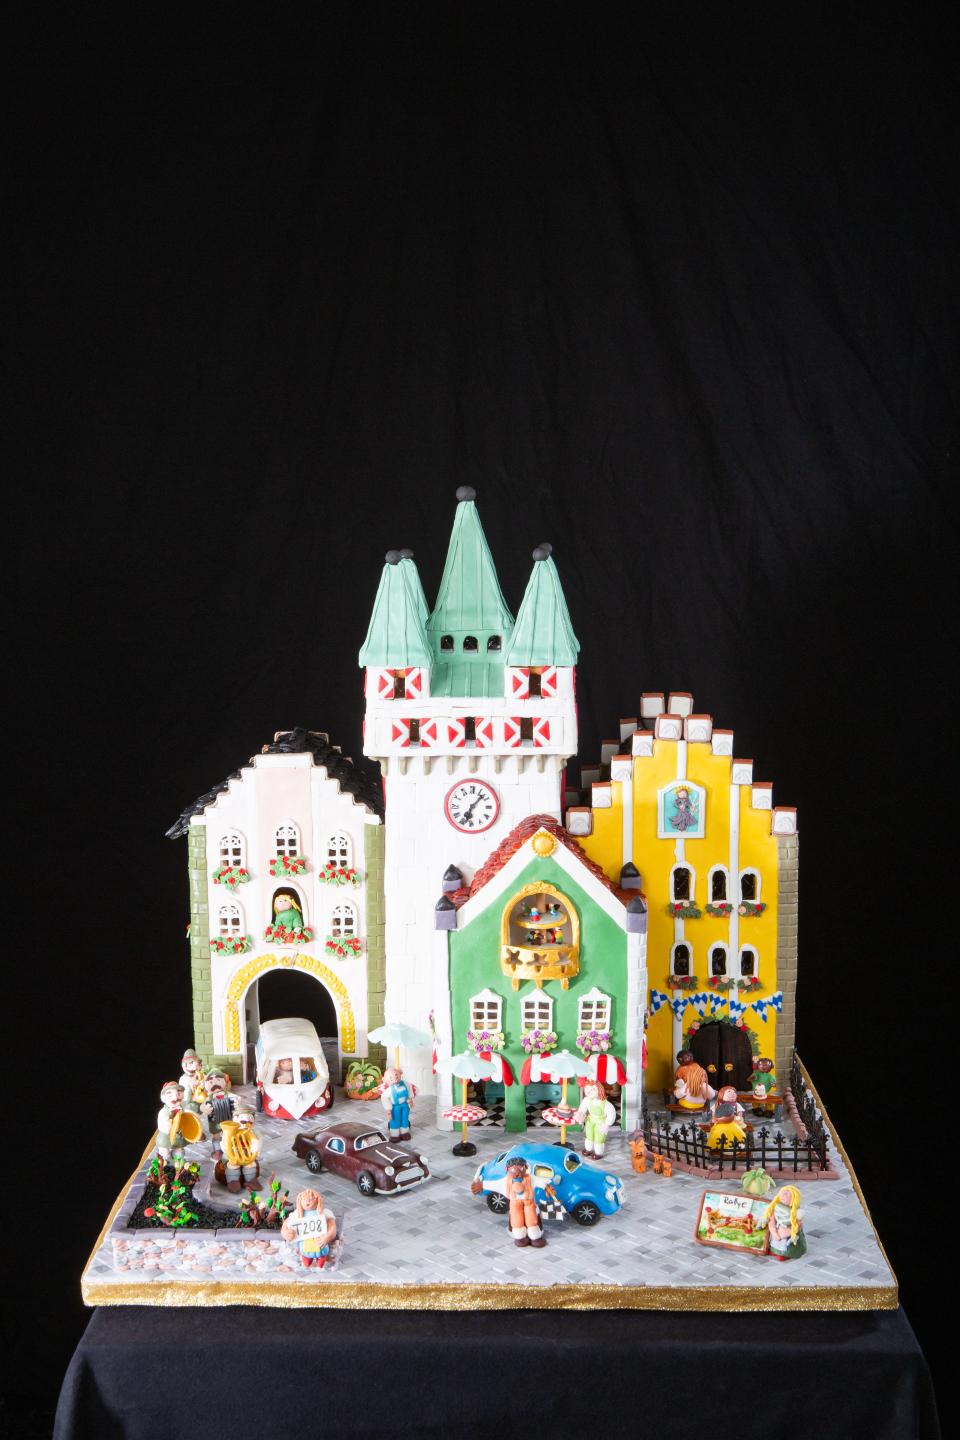 Courtland High School German Program, of Spotsylvania, Virginia, won first place in the Teen division for “Vintage Voyage” at the 31st annual National Gingerbread House Competition.